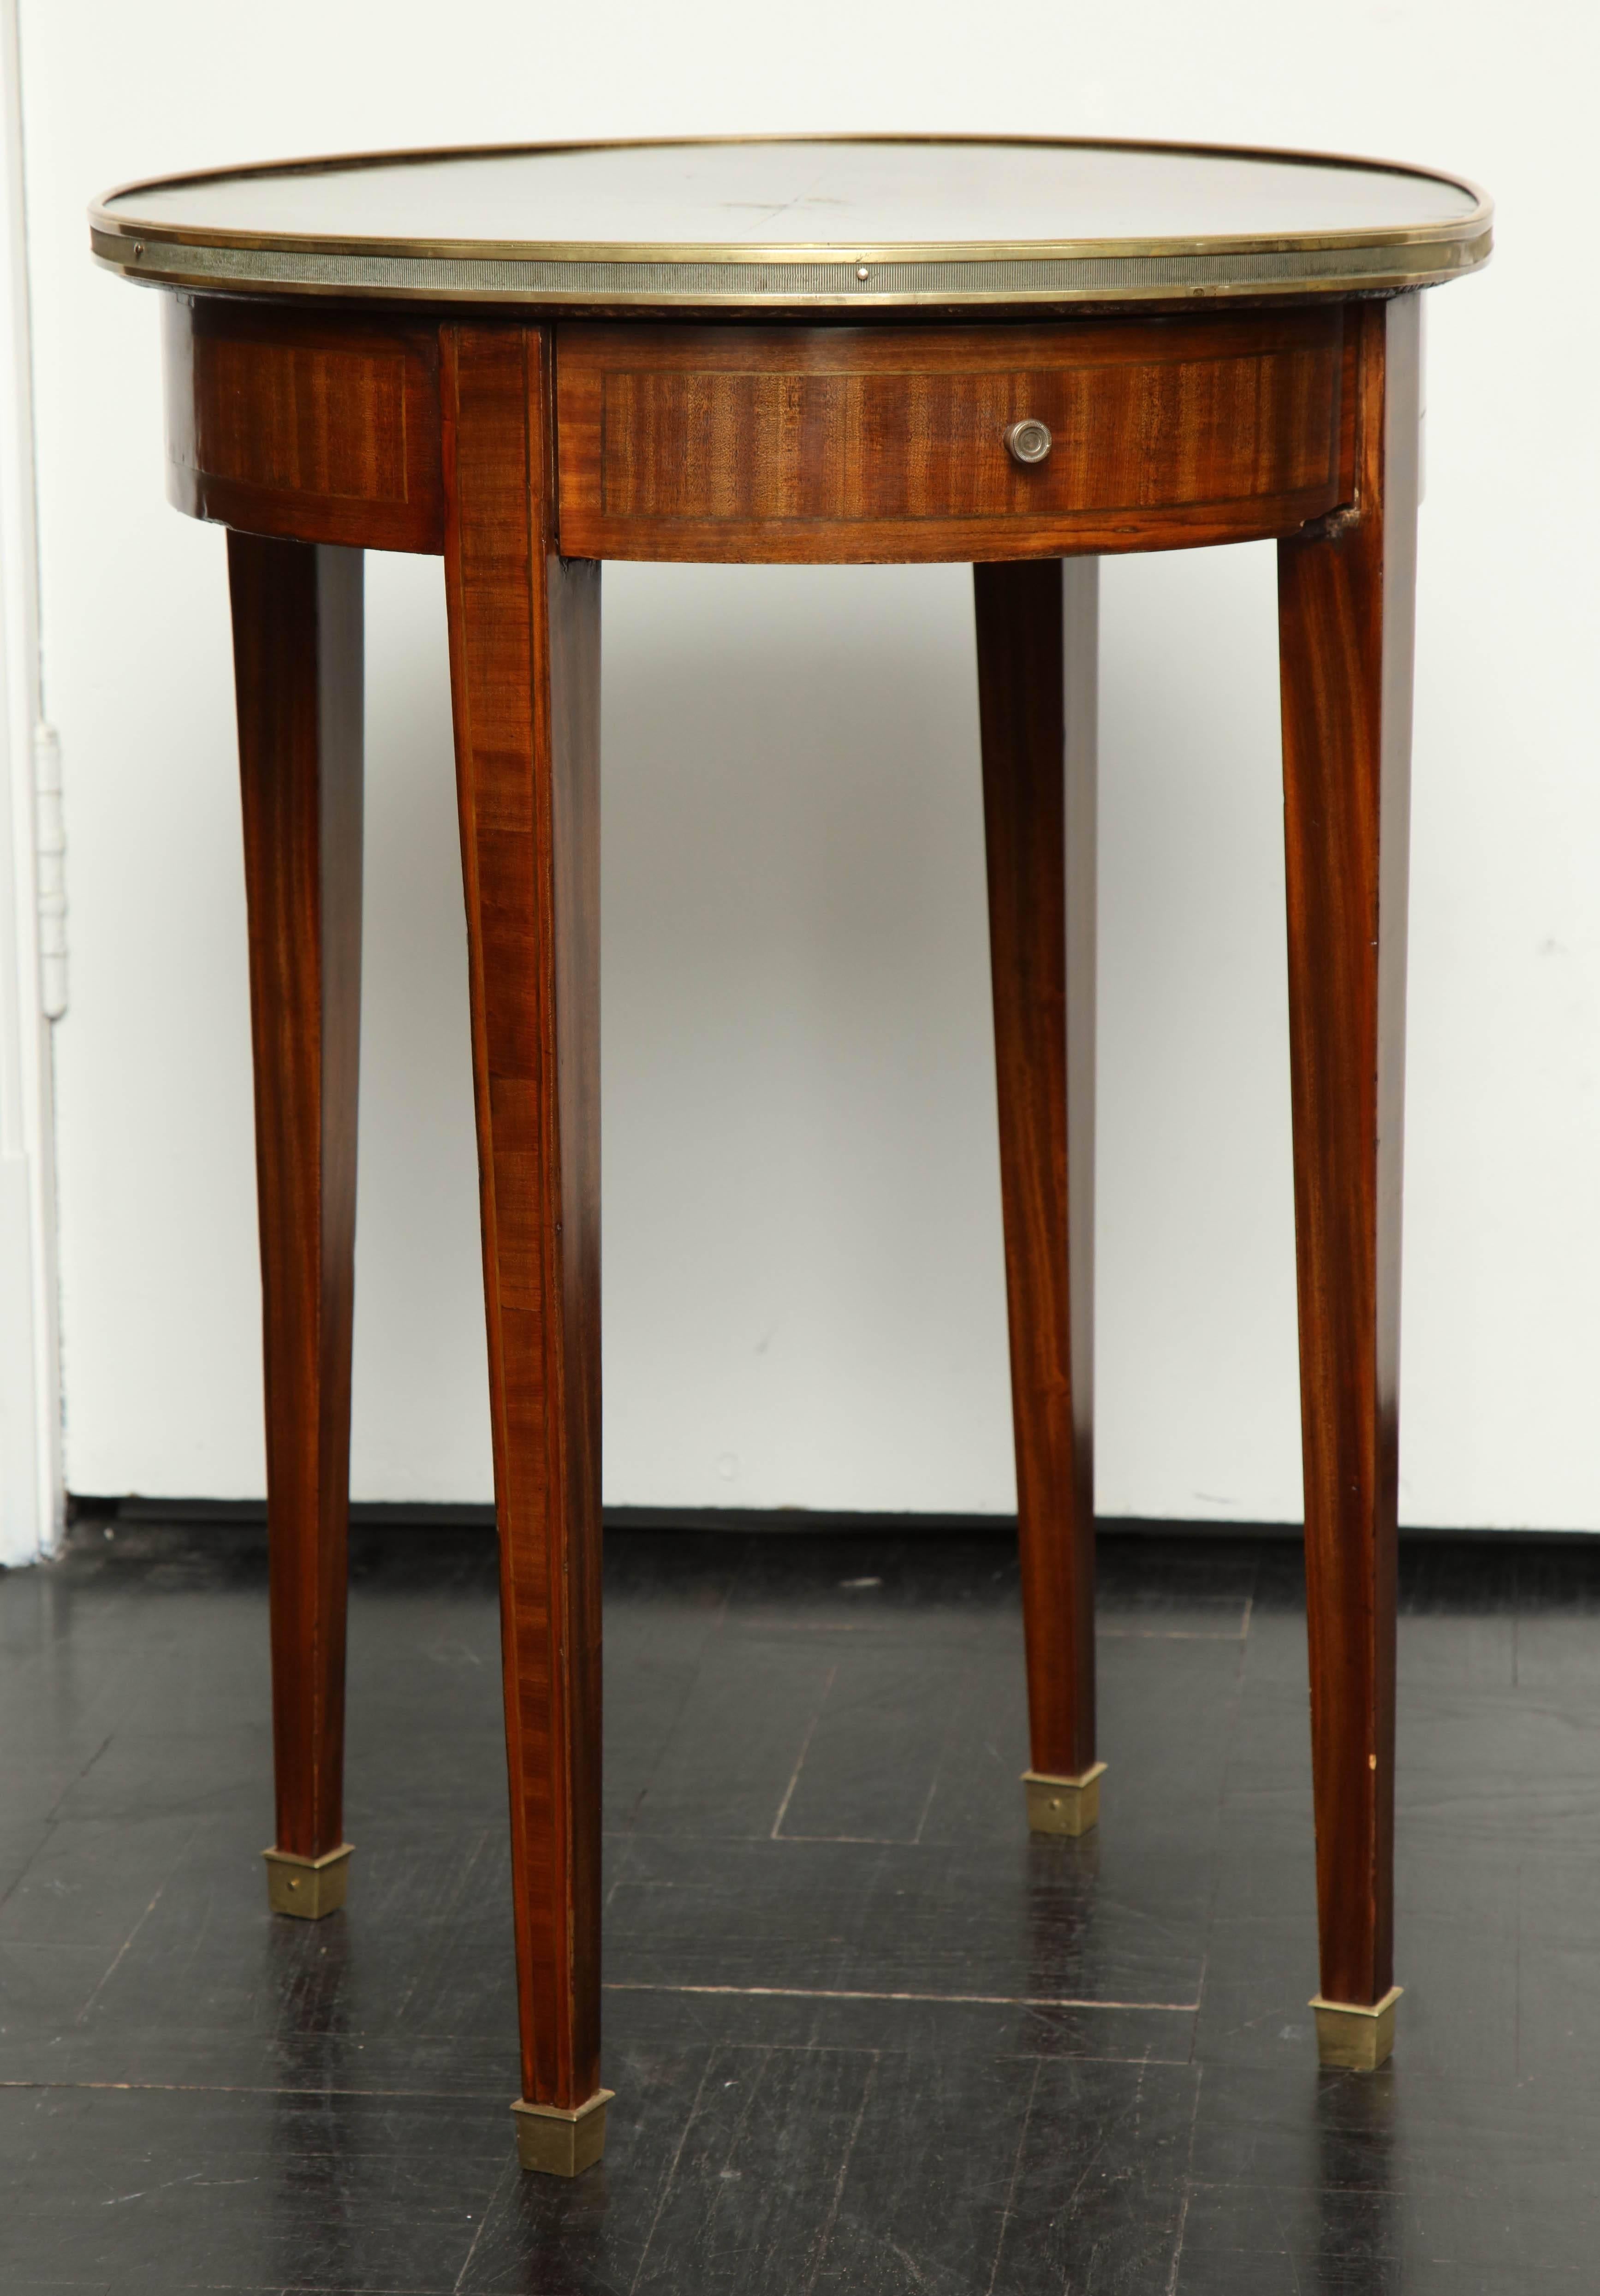 19th century palisandre circular side table, radient top, brass band edge, polished apron with one drawer, four legs, brass sabots.